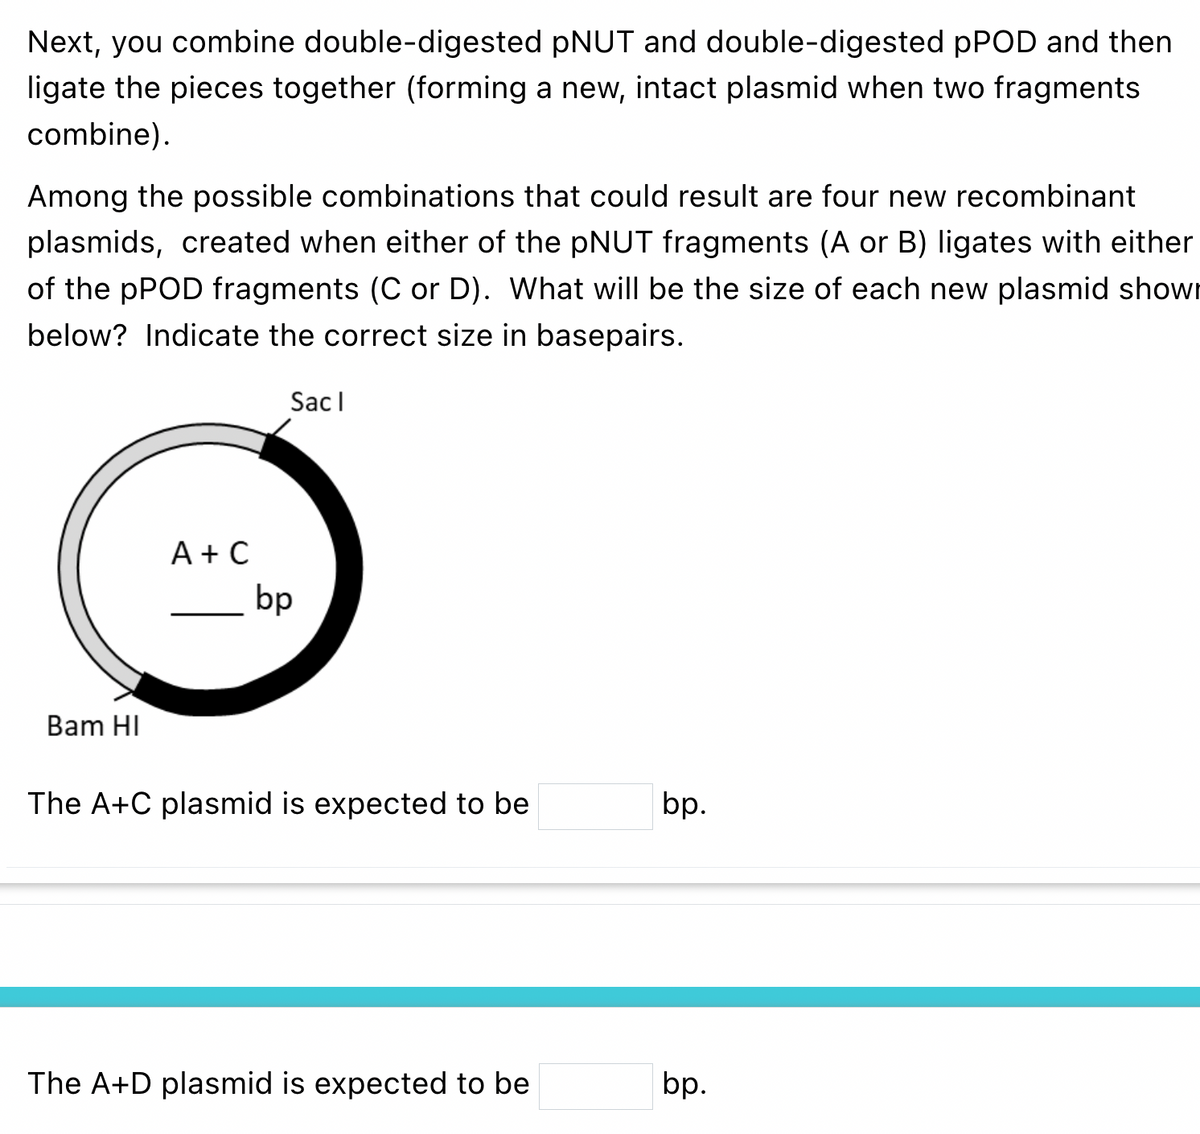 Next, you combine double-digested pNUT and double-digested pPOD and then
ligate the pieces together (forming a new, intact plasmid when two fragments
combine).
Among the possible combinations that could result are four new recombinant
plasmids, created when either of the pNUT fragments (A or B) ligates with either
of the pPOD fragments (C or D). What will be the size of each new plasmid show
below? Indicate the correct size in basepairs.
Bam HI
Sacl
A + C
bp
The A+C plasmid is expected to be
The A+D plasmid is expected to be
bp.
bp.